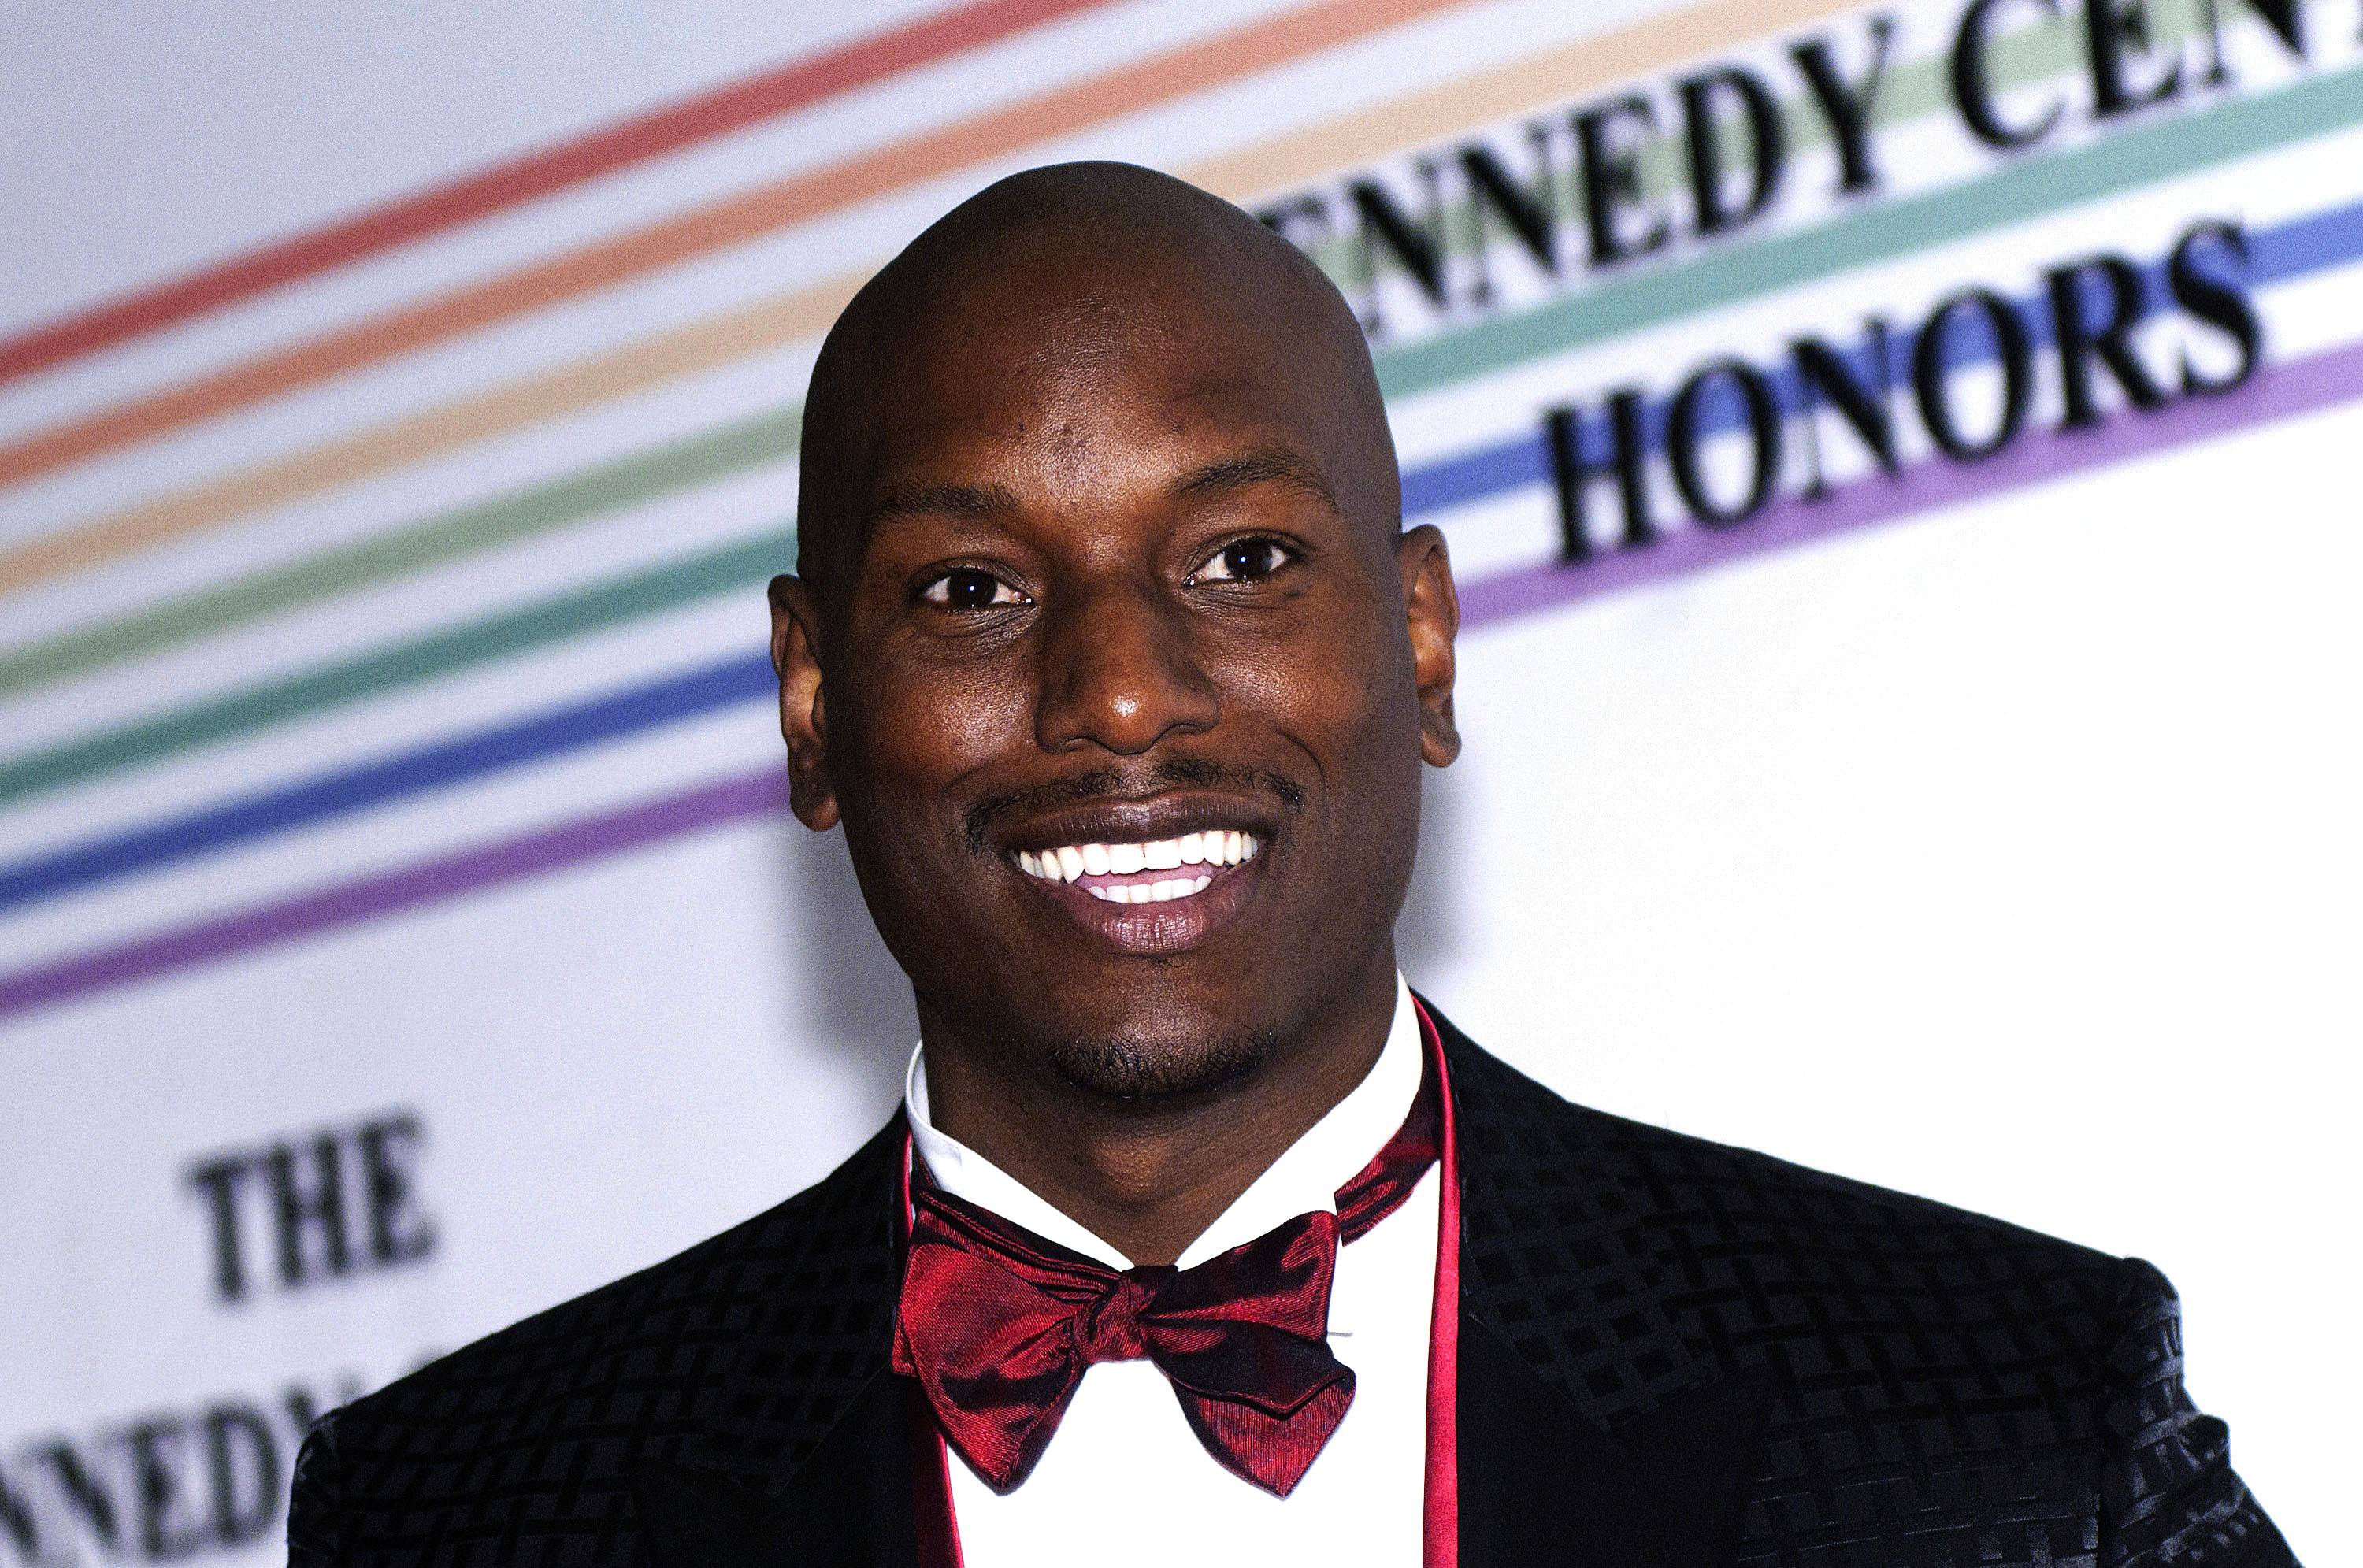 Tyrese (@Tyrese)&nbsp; - TWEET: &quot;I'm not food poisoned and there is no virus I'm just exhausted .. 2 years on stop of work took its toll .. 2 movies, book, album is a lot!&quot;&nbsp;Tyrese assures fans that he's doing well after being rushed to the hospital.&nbsp;(Photo: Kris Connor/Getty Images)